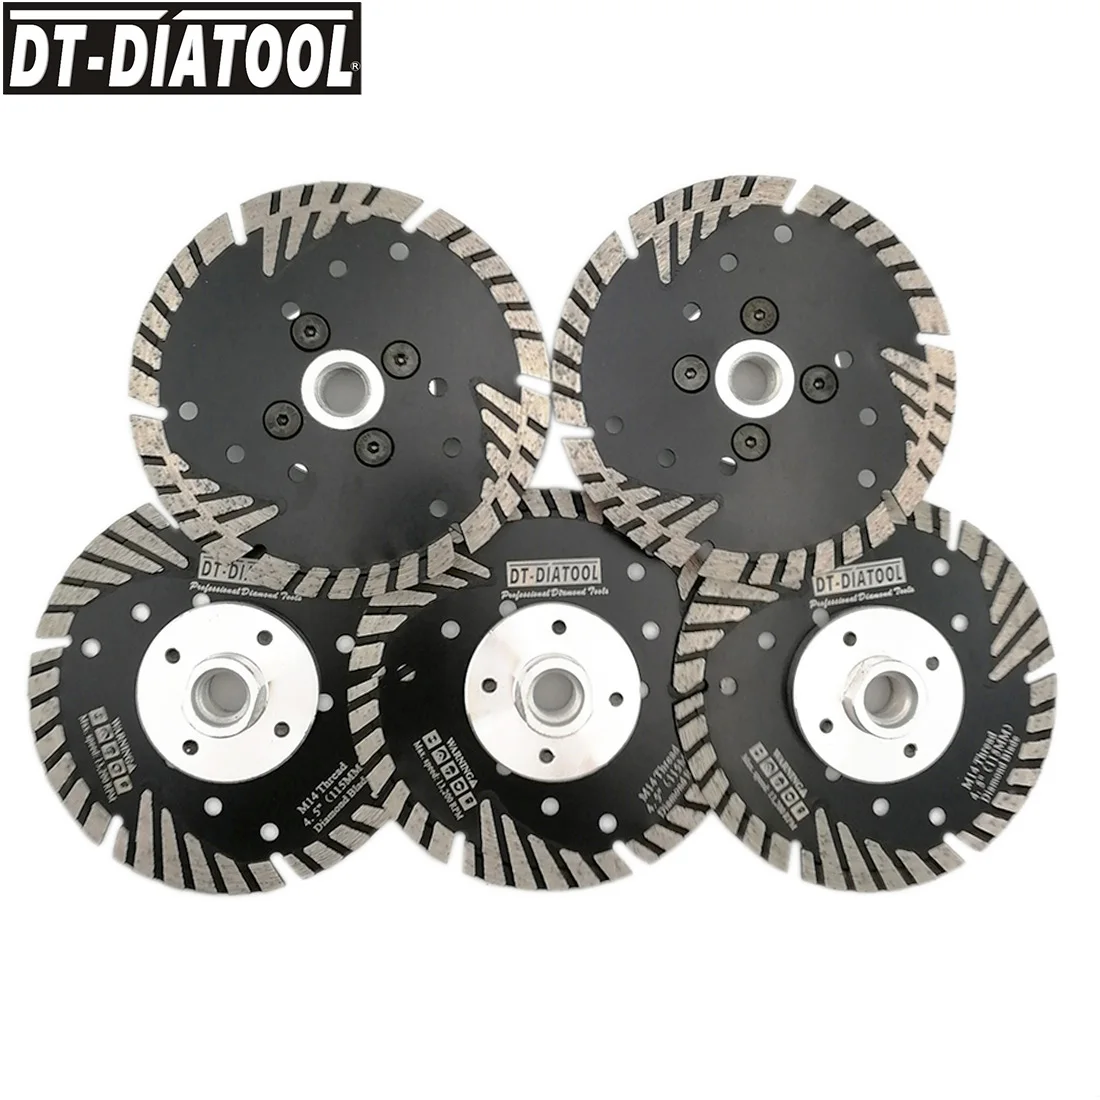 DT-DIATOOL 5pcs/pk 115mm/4.5inch Hot Pressed Diamond Turbo Blade Cutting Wheel For Stone & Concrete material Concrete Saw Blades